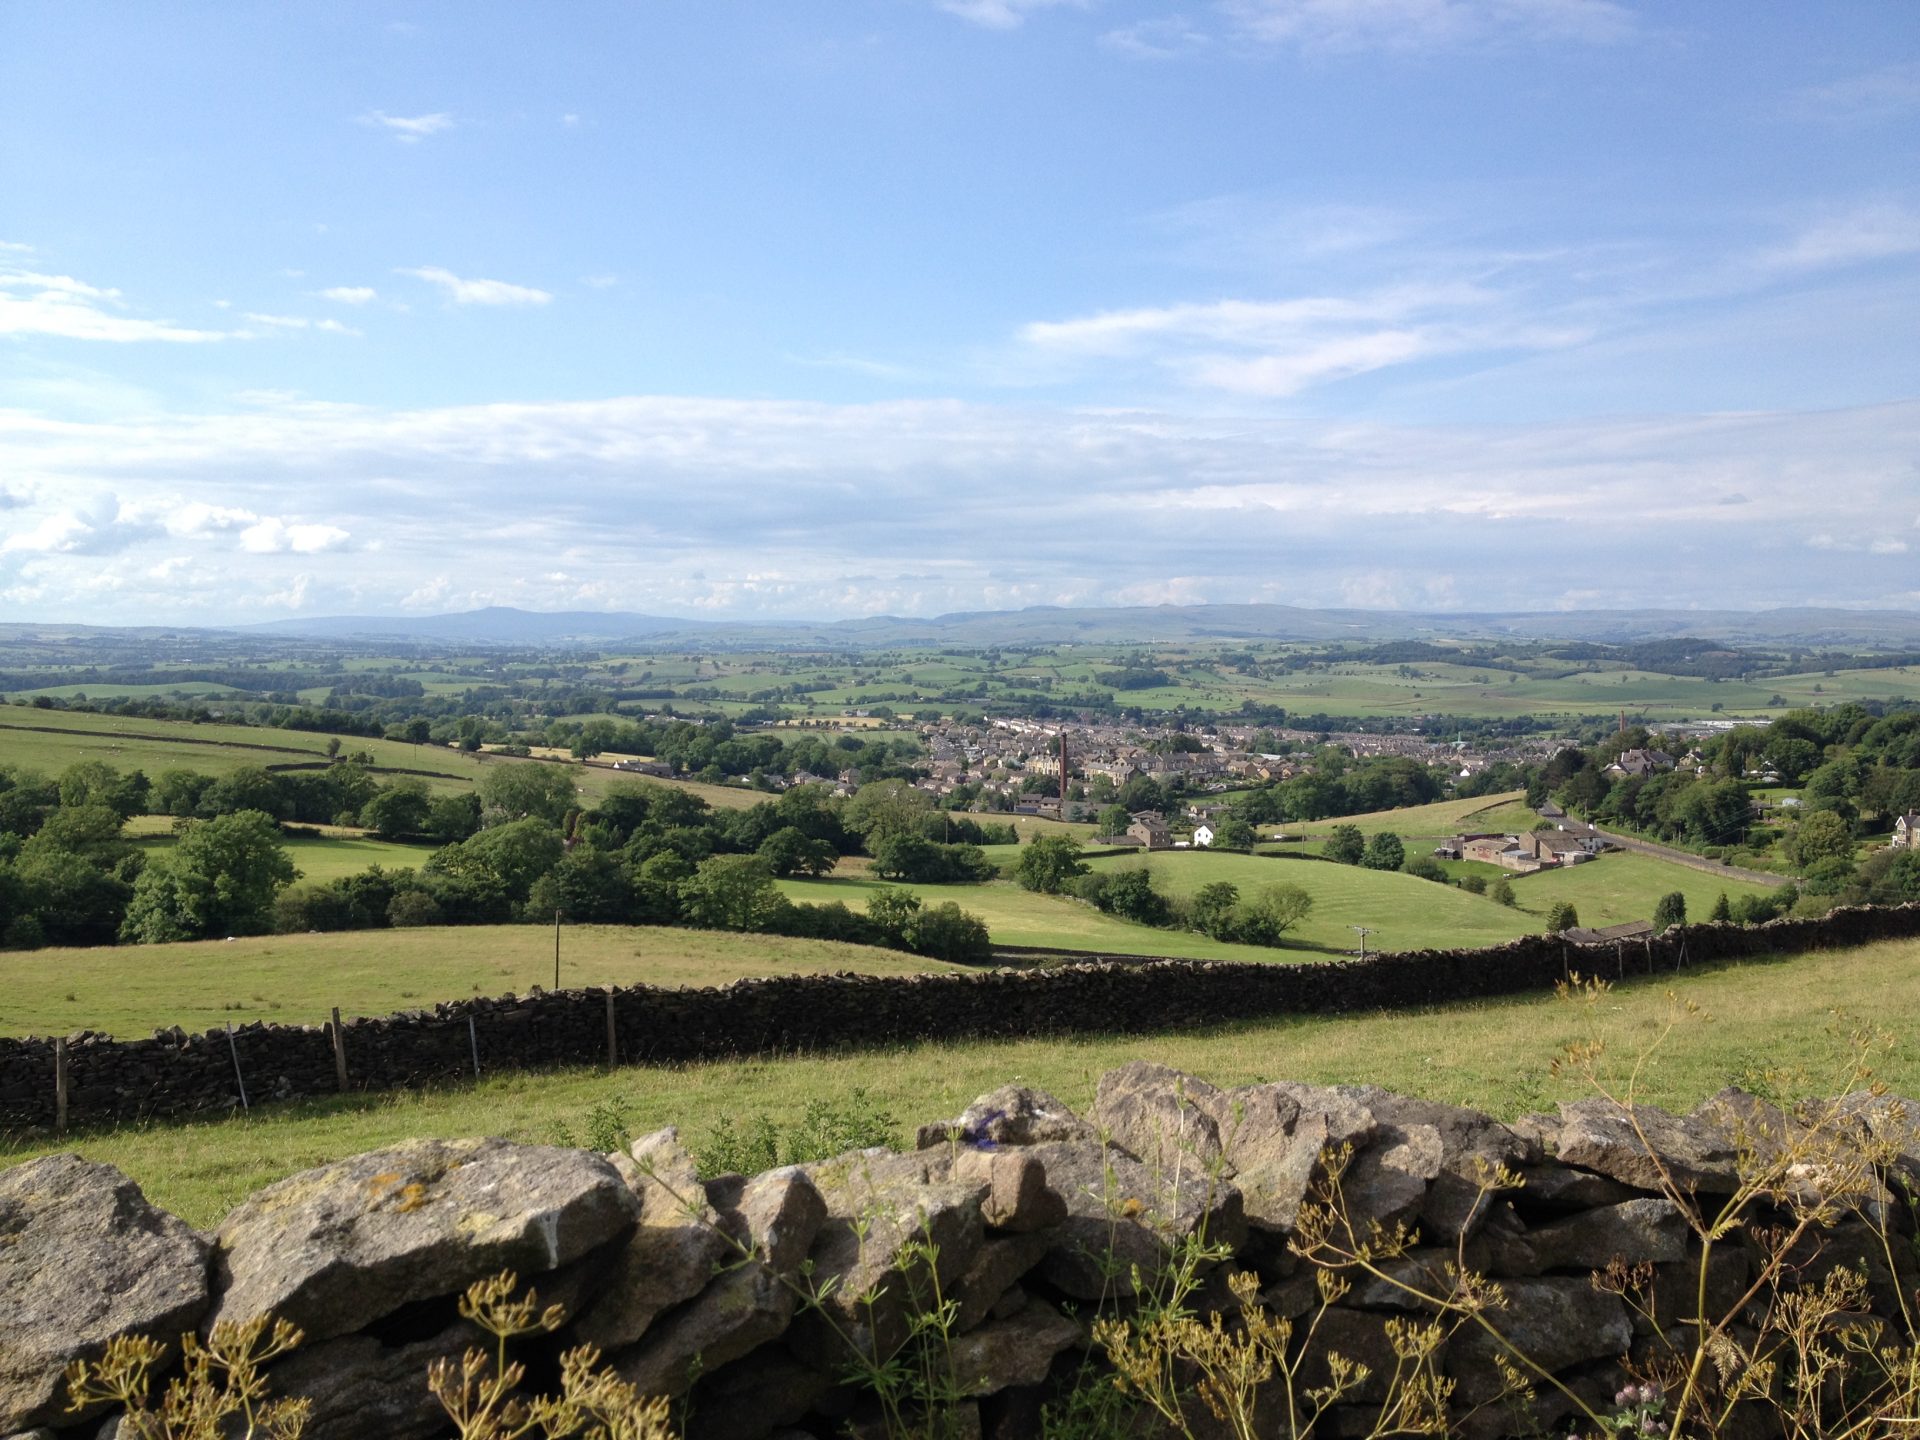 /content/uploads/Barnoldswick_looking_across_Craven_and_the_Yorkshire_Dales-1920x1440.jpg